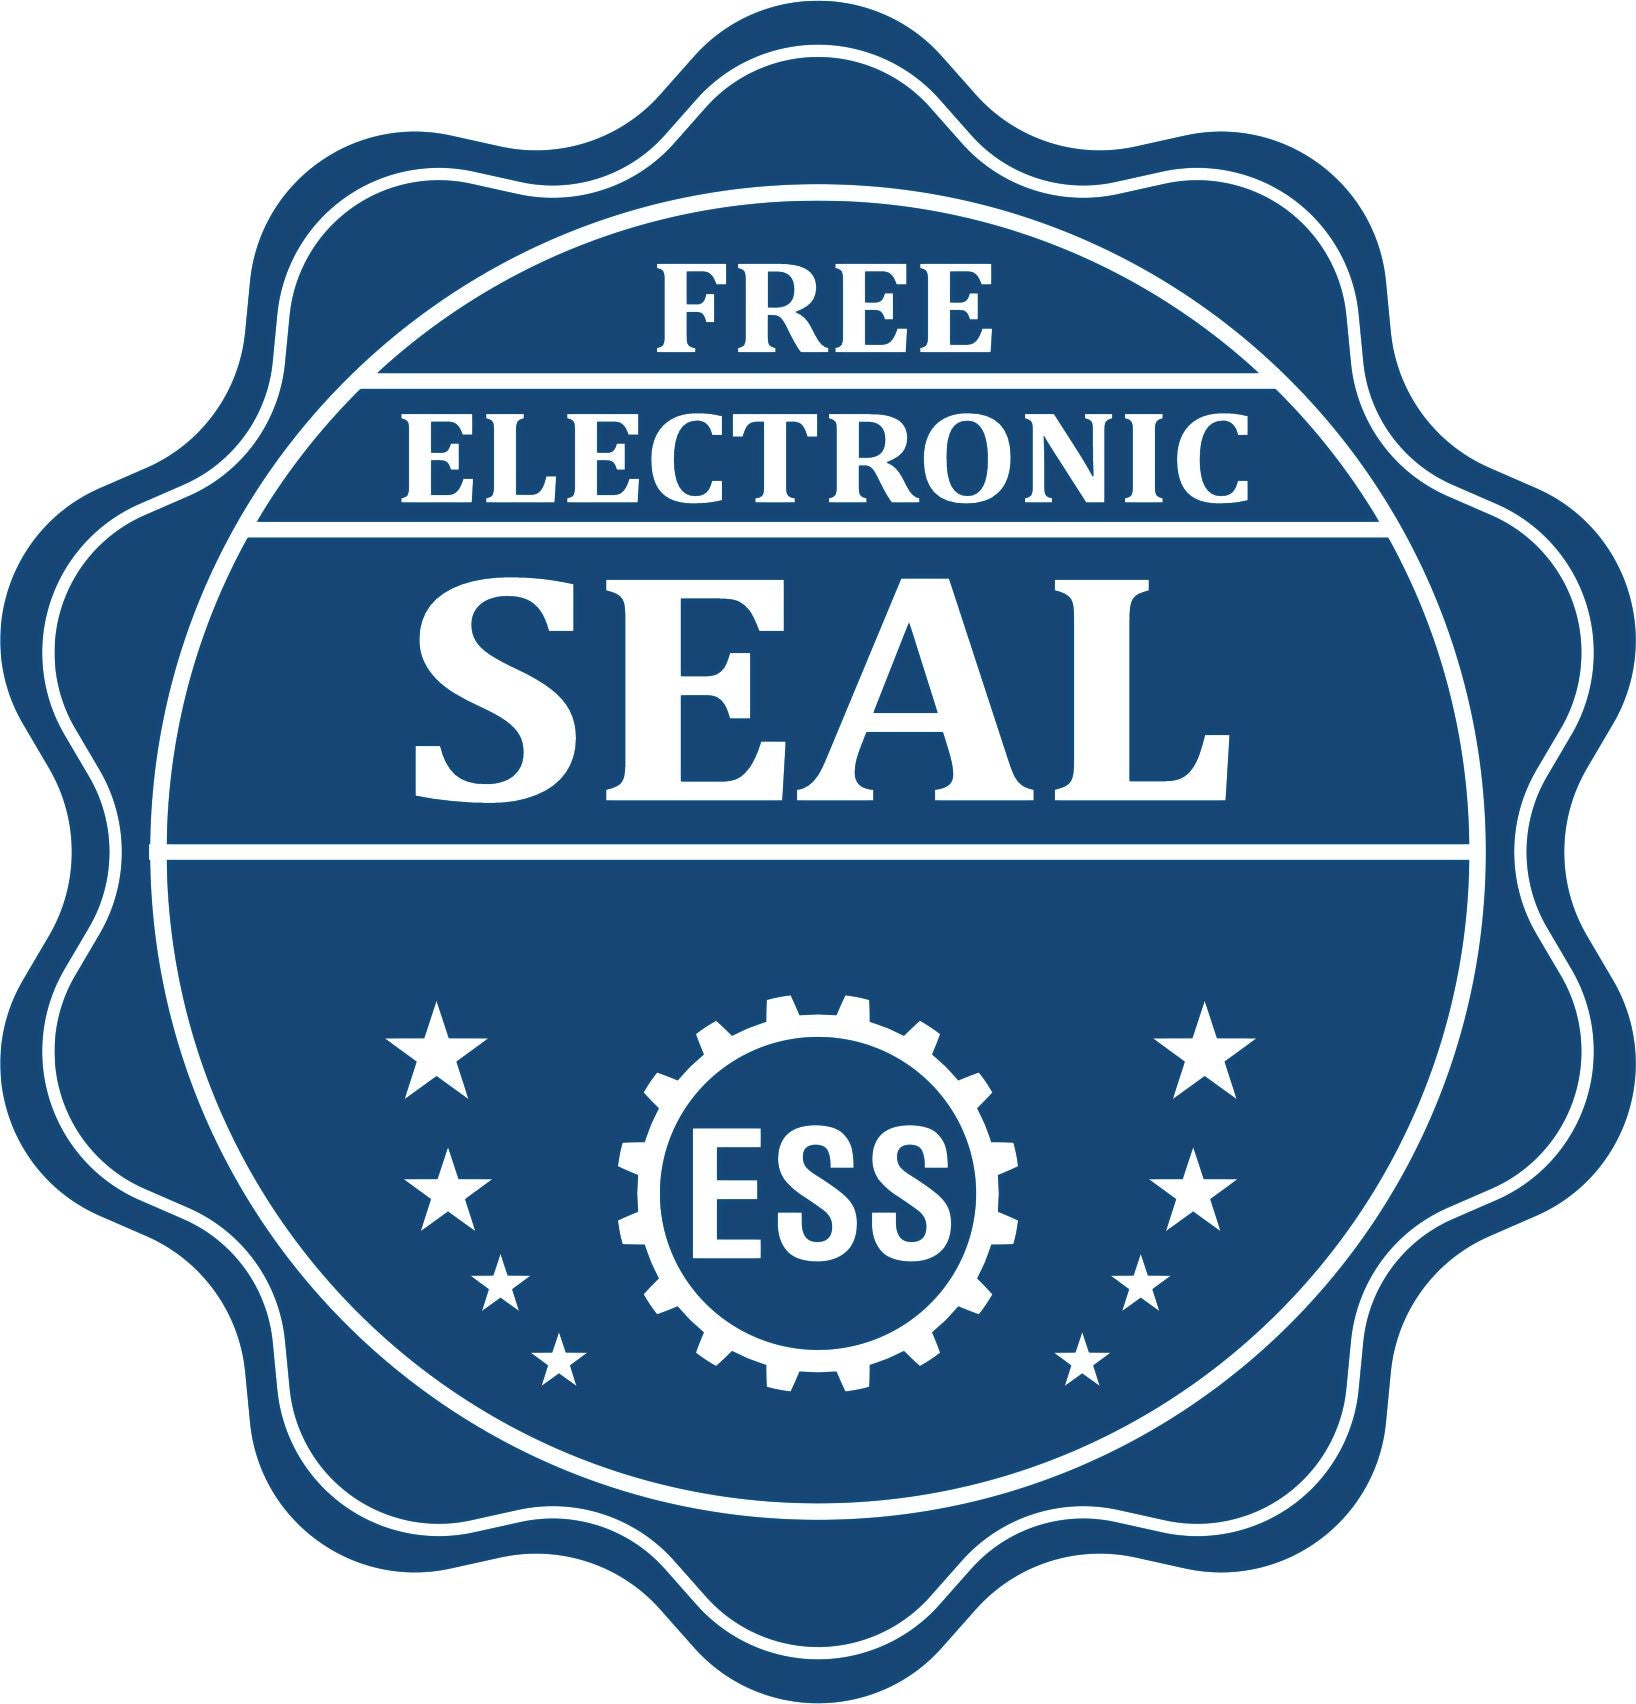 A badge showing a free electronic seal for the Tennessee Desk Architect Embossing Seal with stars and the ESS gear on the emblem.